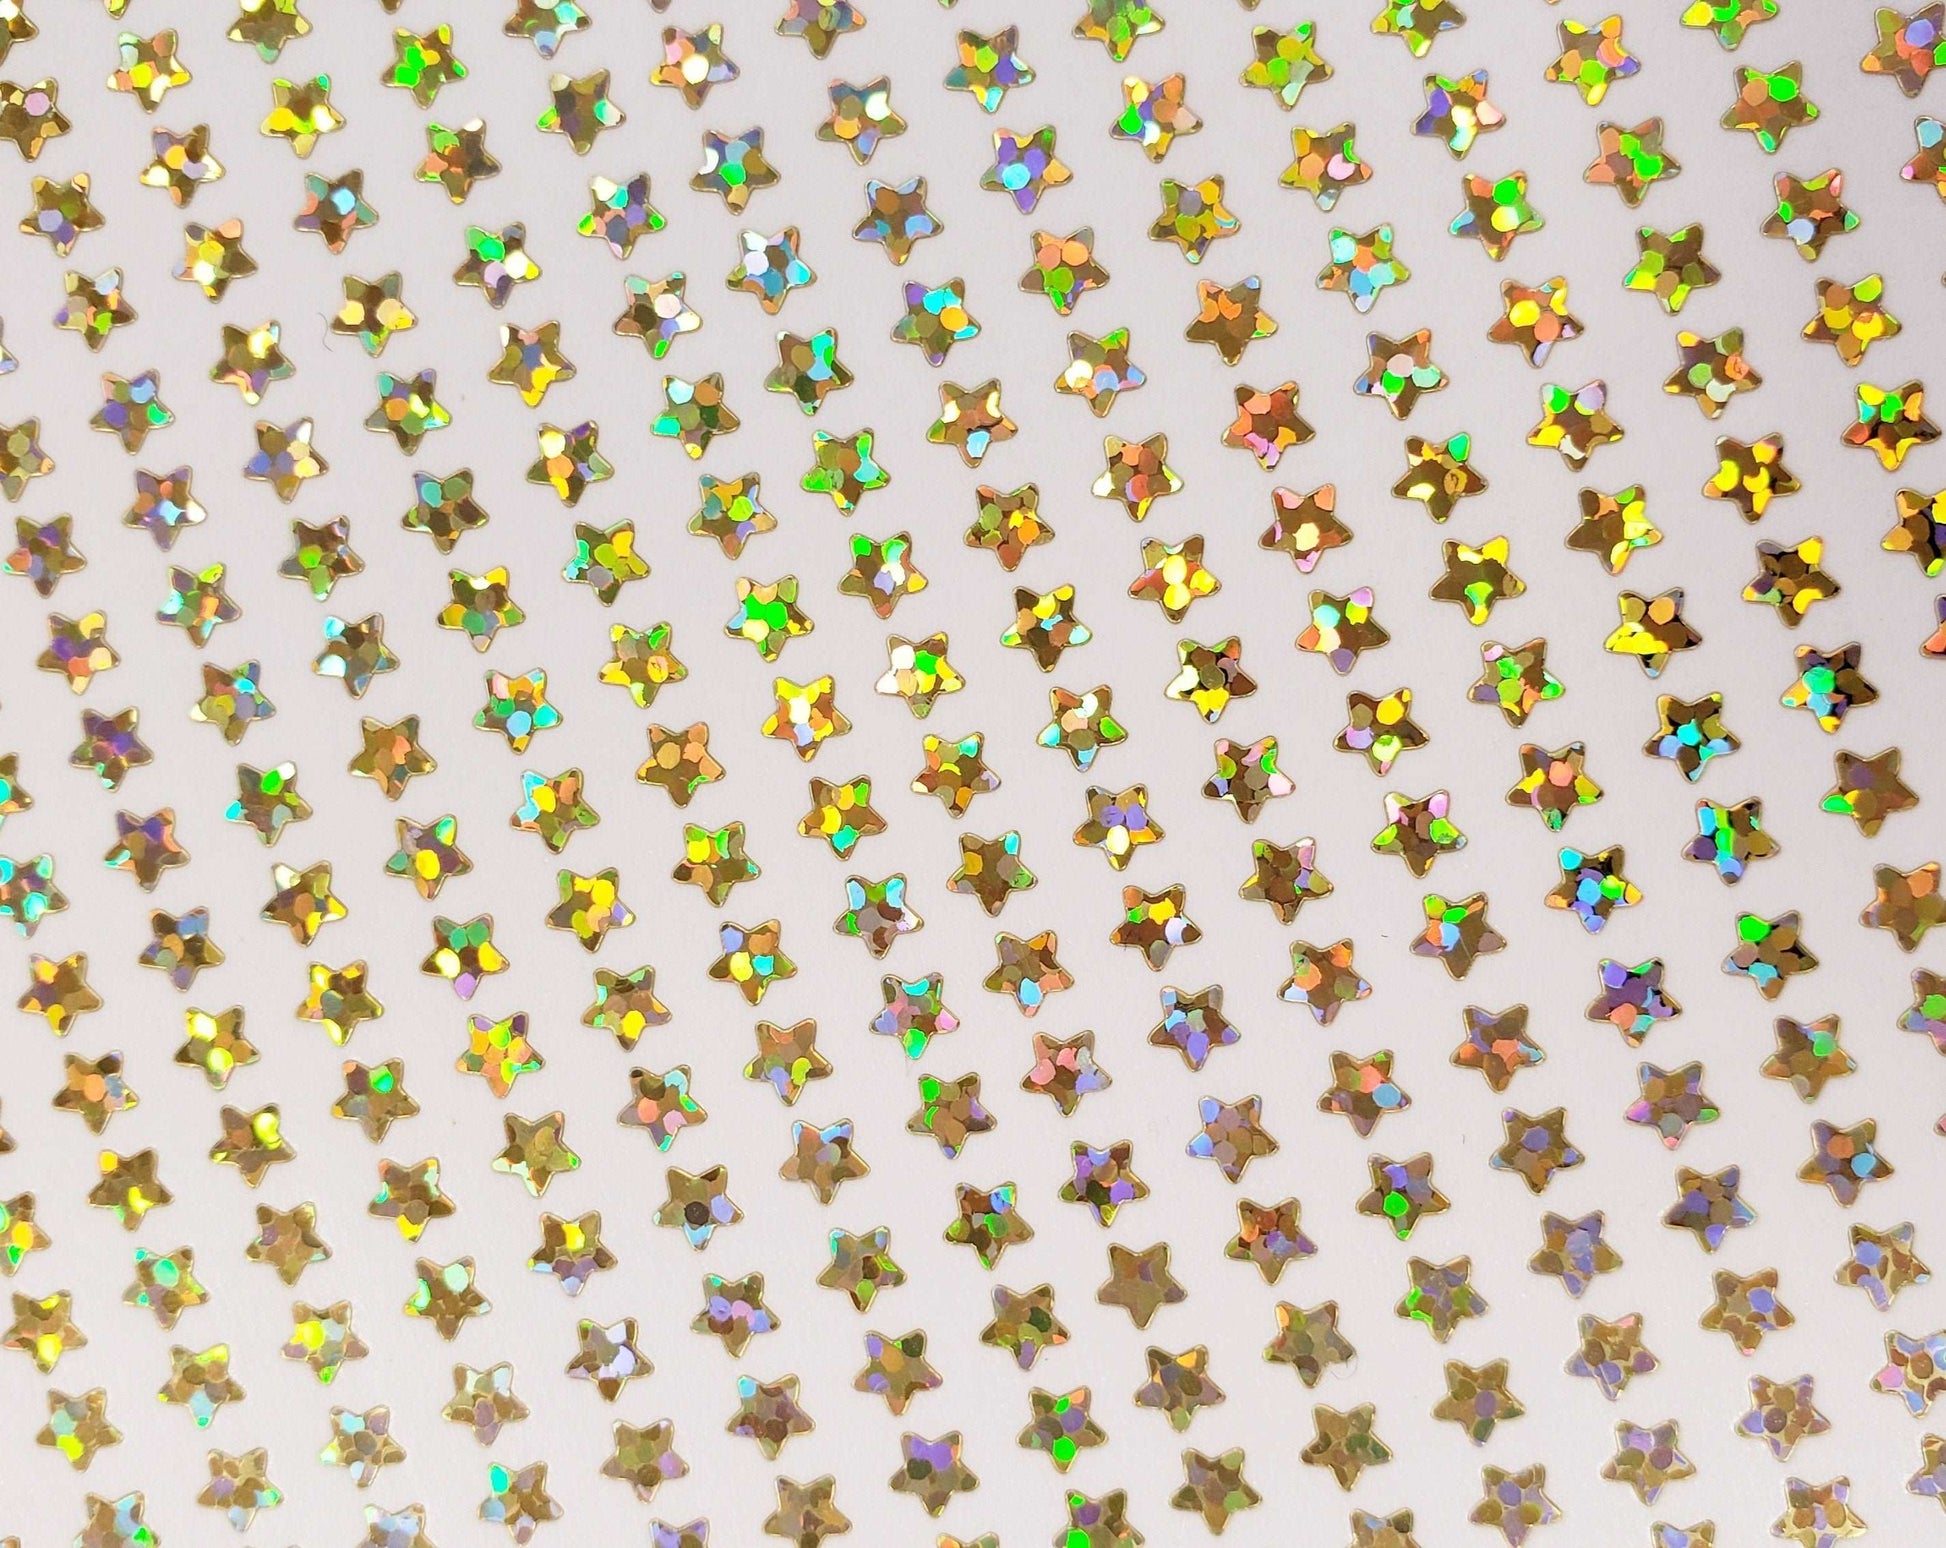 Extra Small Gold Star Stickers – Fairy Dust Decals